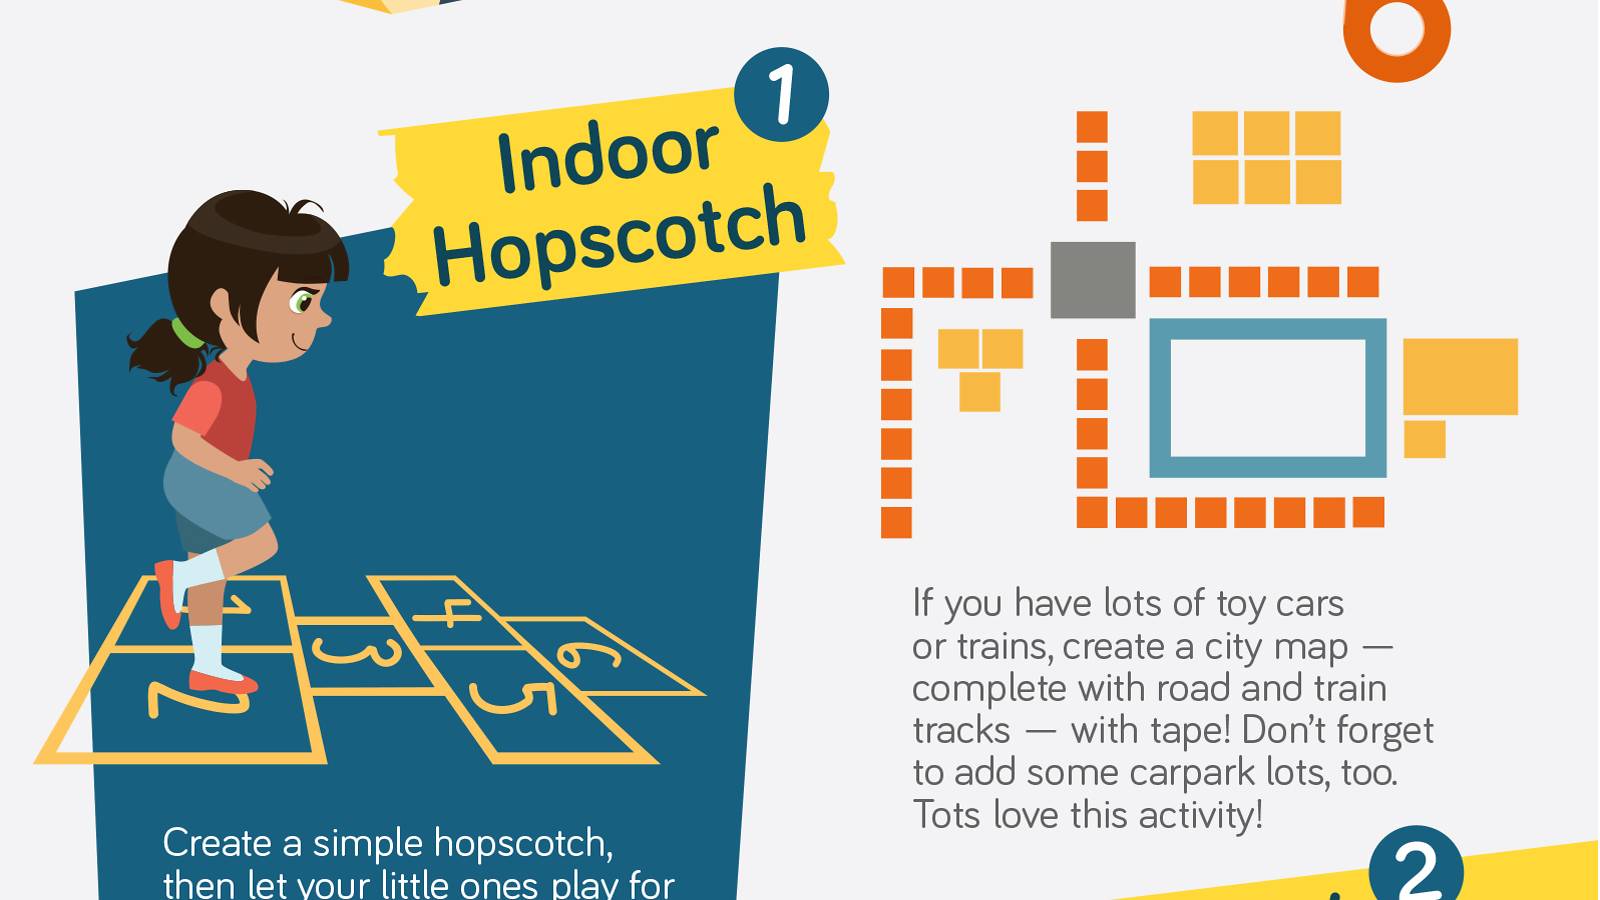 Tots-10-creative-sticky-tape-toddler-activities-[Infographic]_02